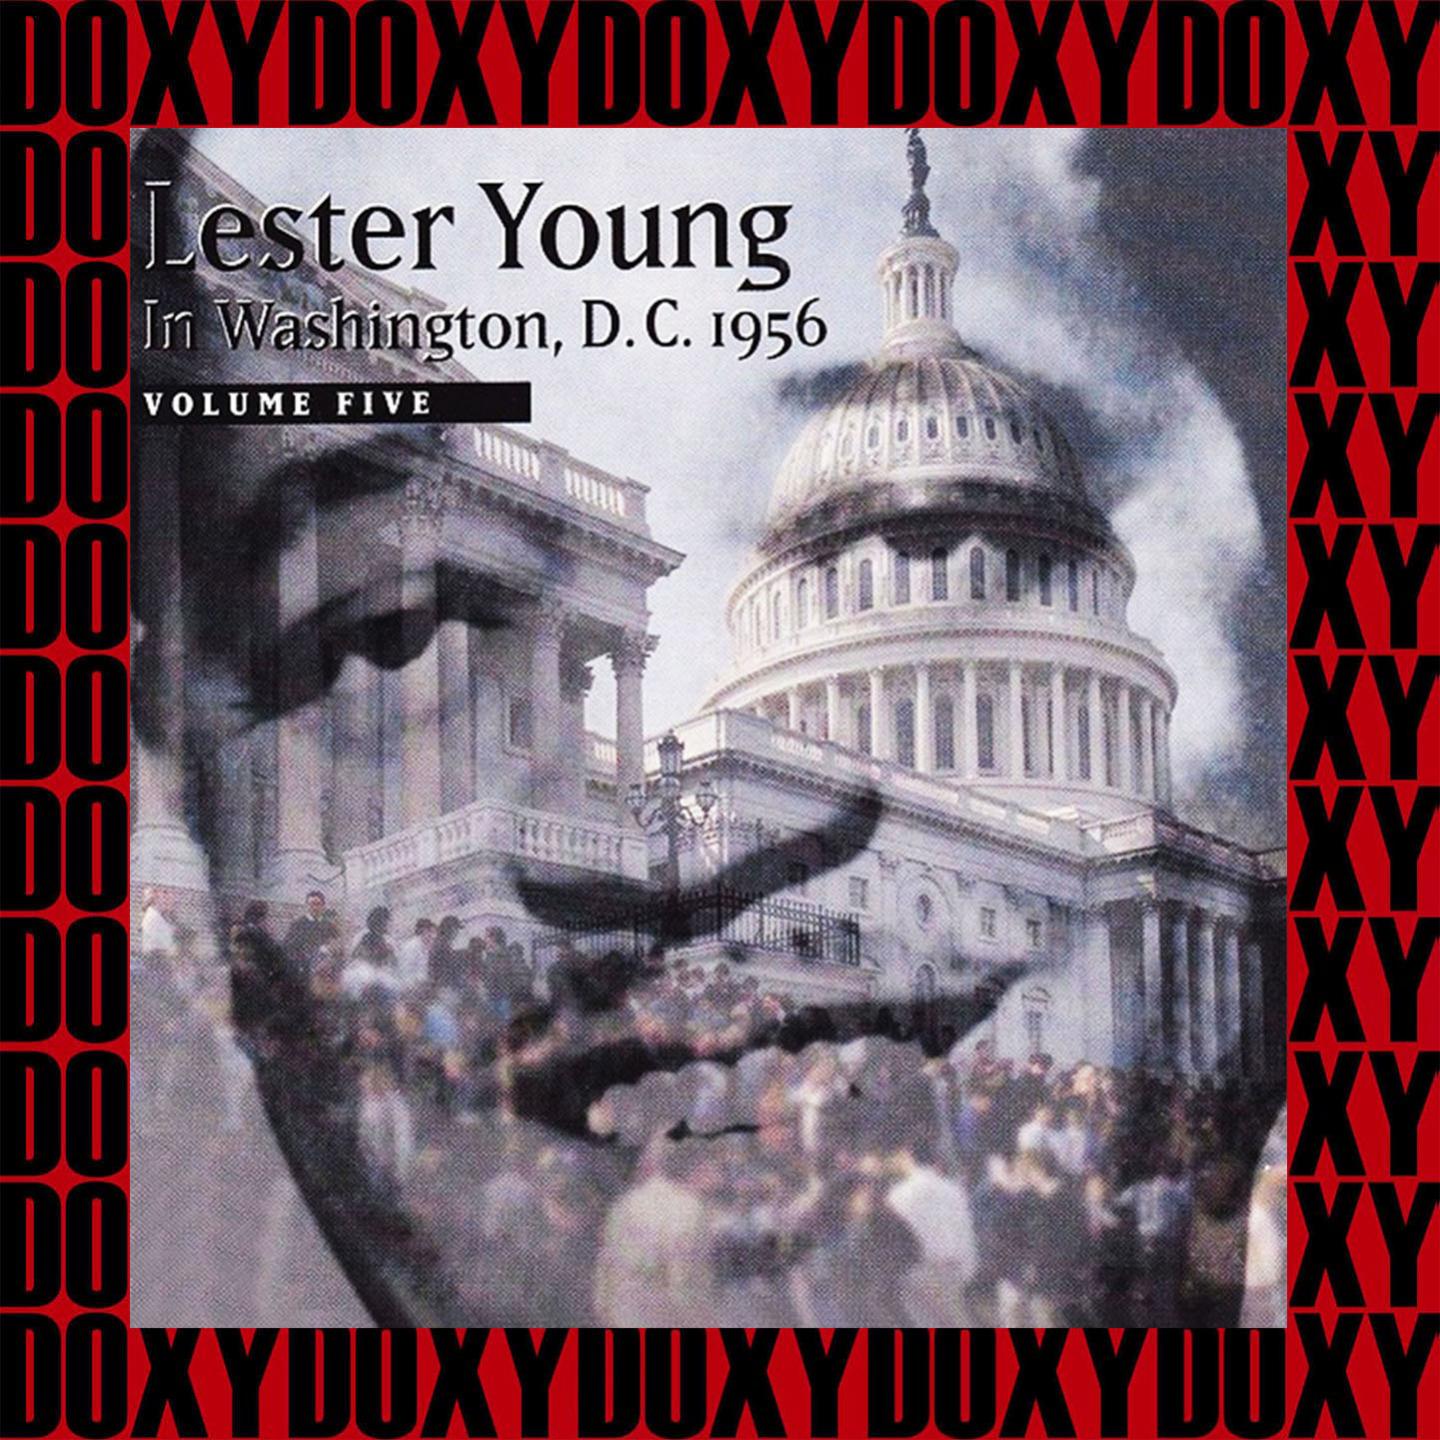 Lester Young in Washington D.C, 1956 Vol. 5 (Remastered Version) (Doxy Collection)